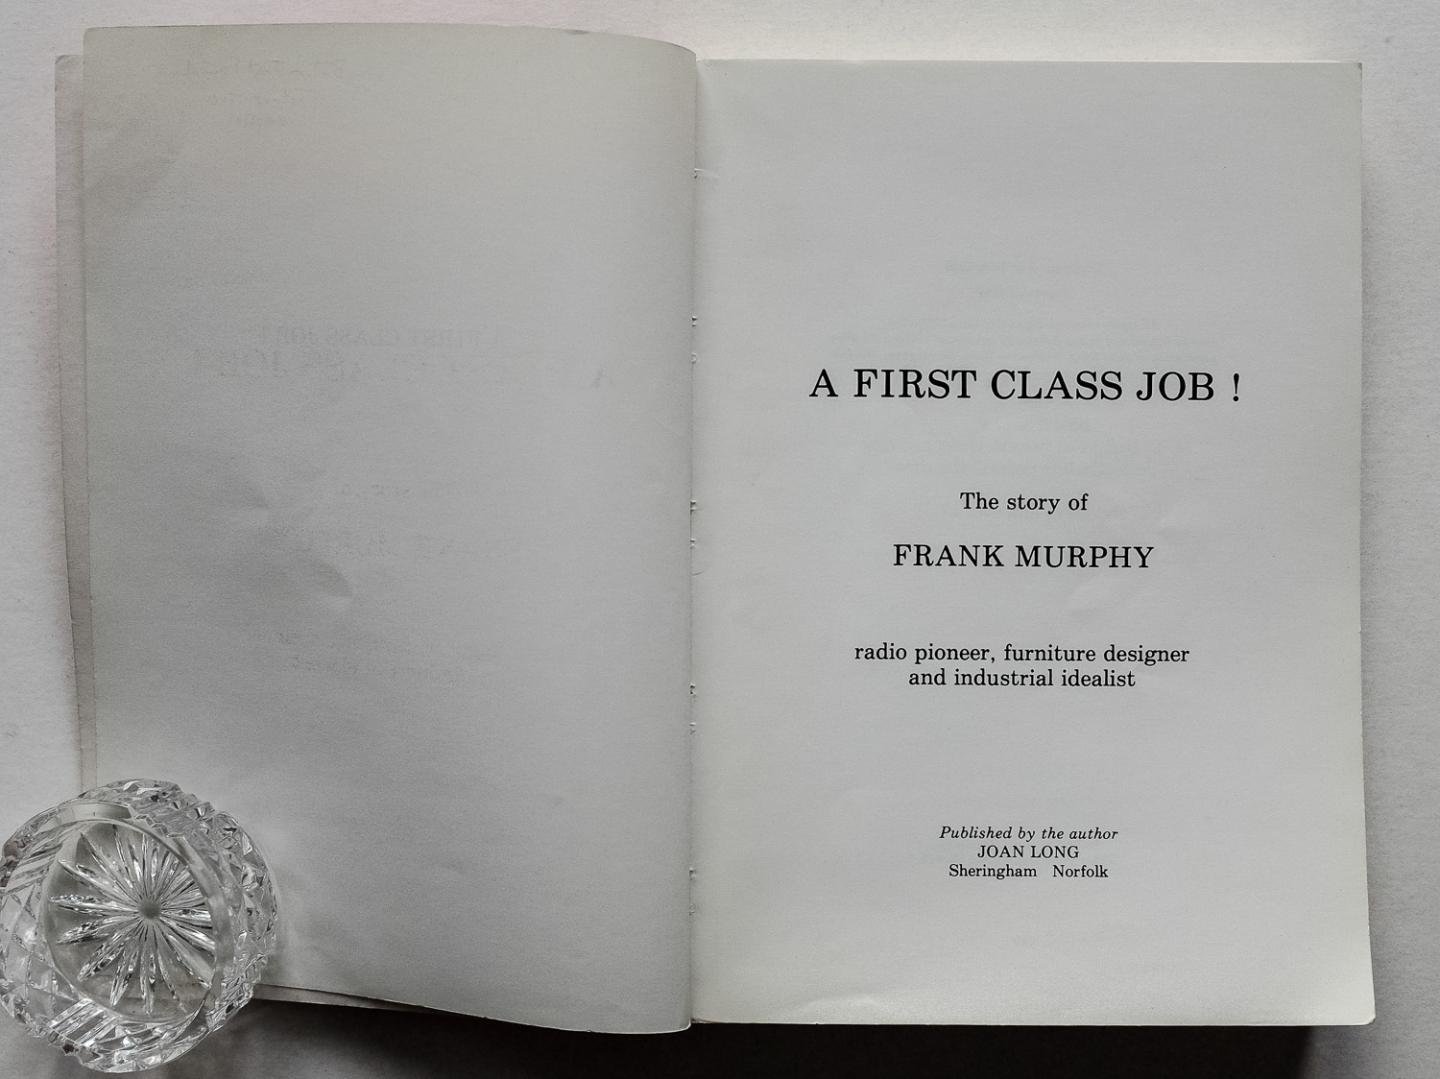 Long, Joan - A first class job! : the story of Frank Murphy : radio pioneer, furniture designer and industrial idealist